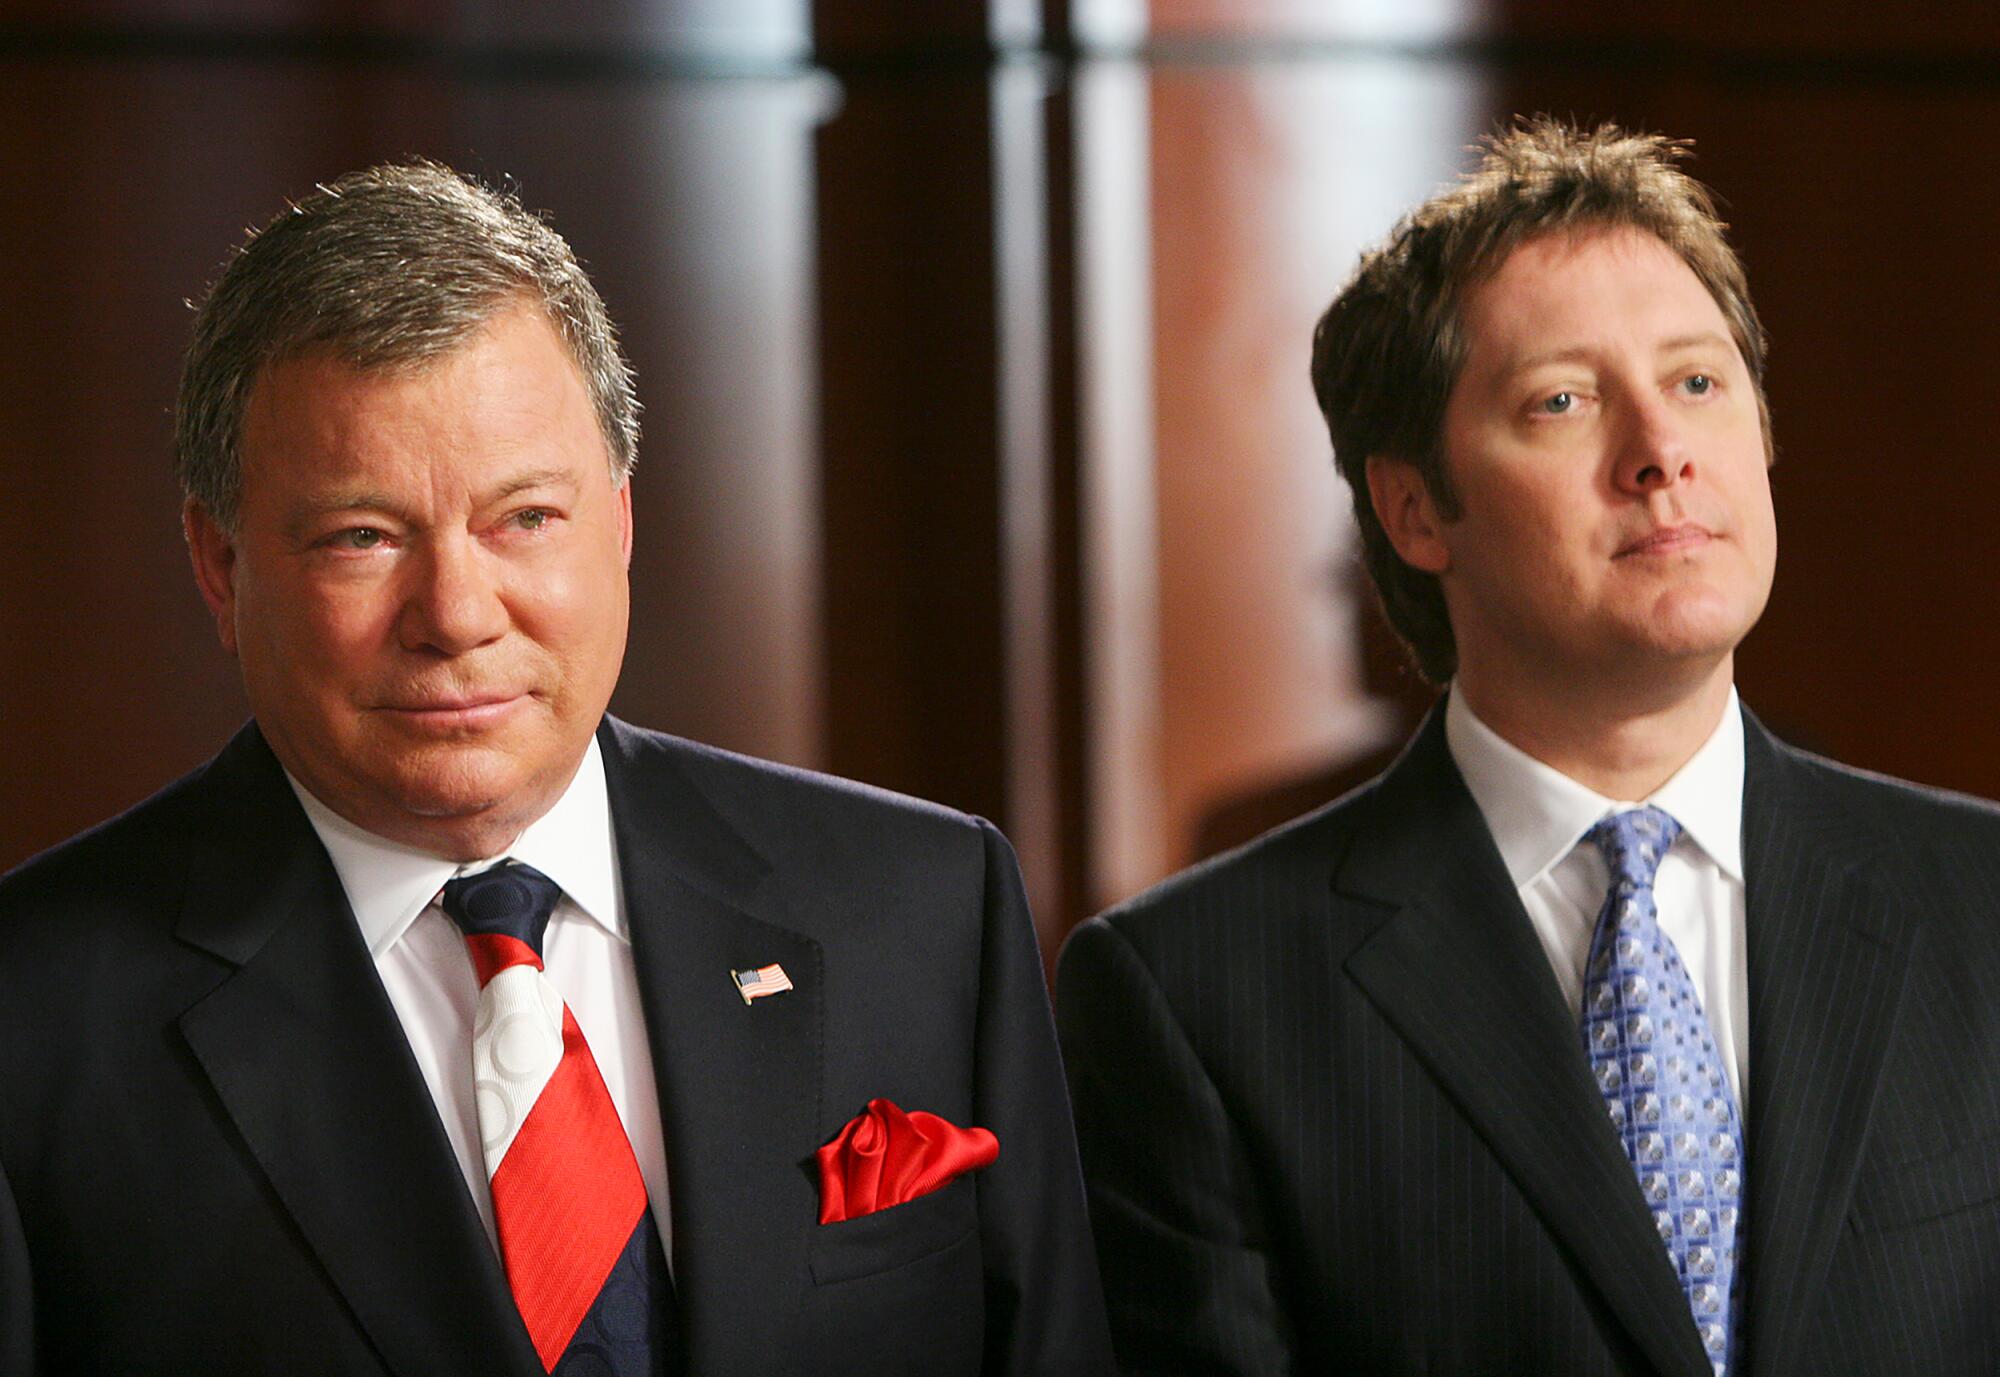 Two men stand side by side in black suits and ties.